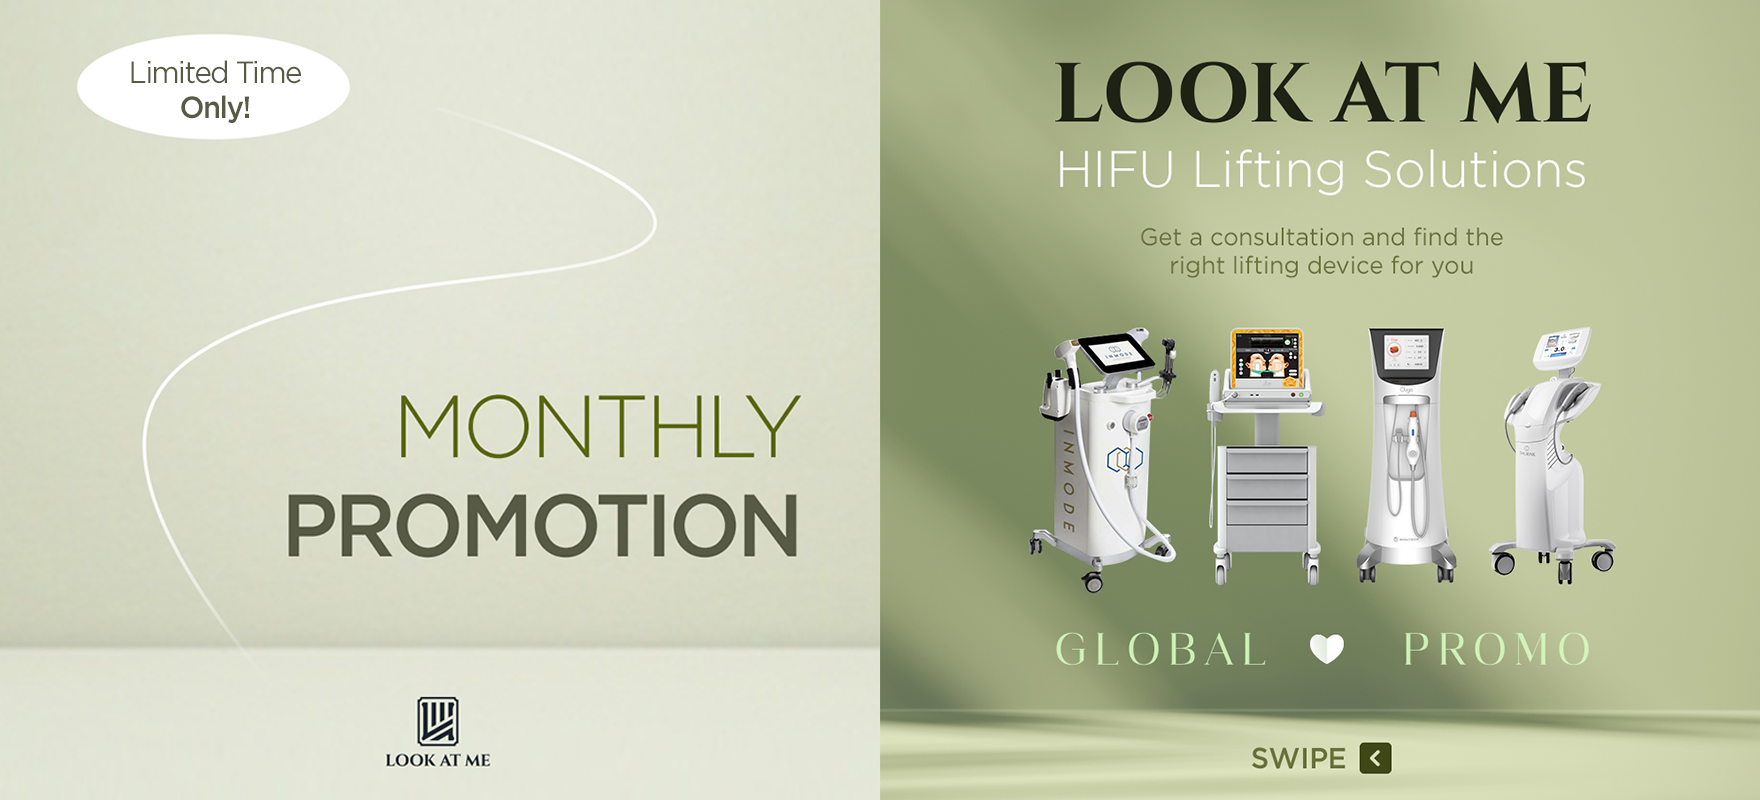 Beauty and Skincare are for everyone. Look At Me Clinic’s monthly promotions bring lifting solutions to you.